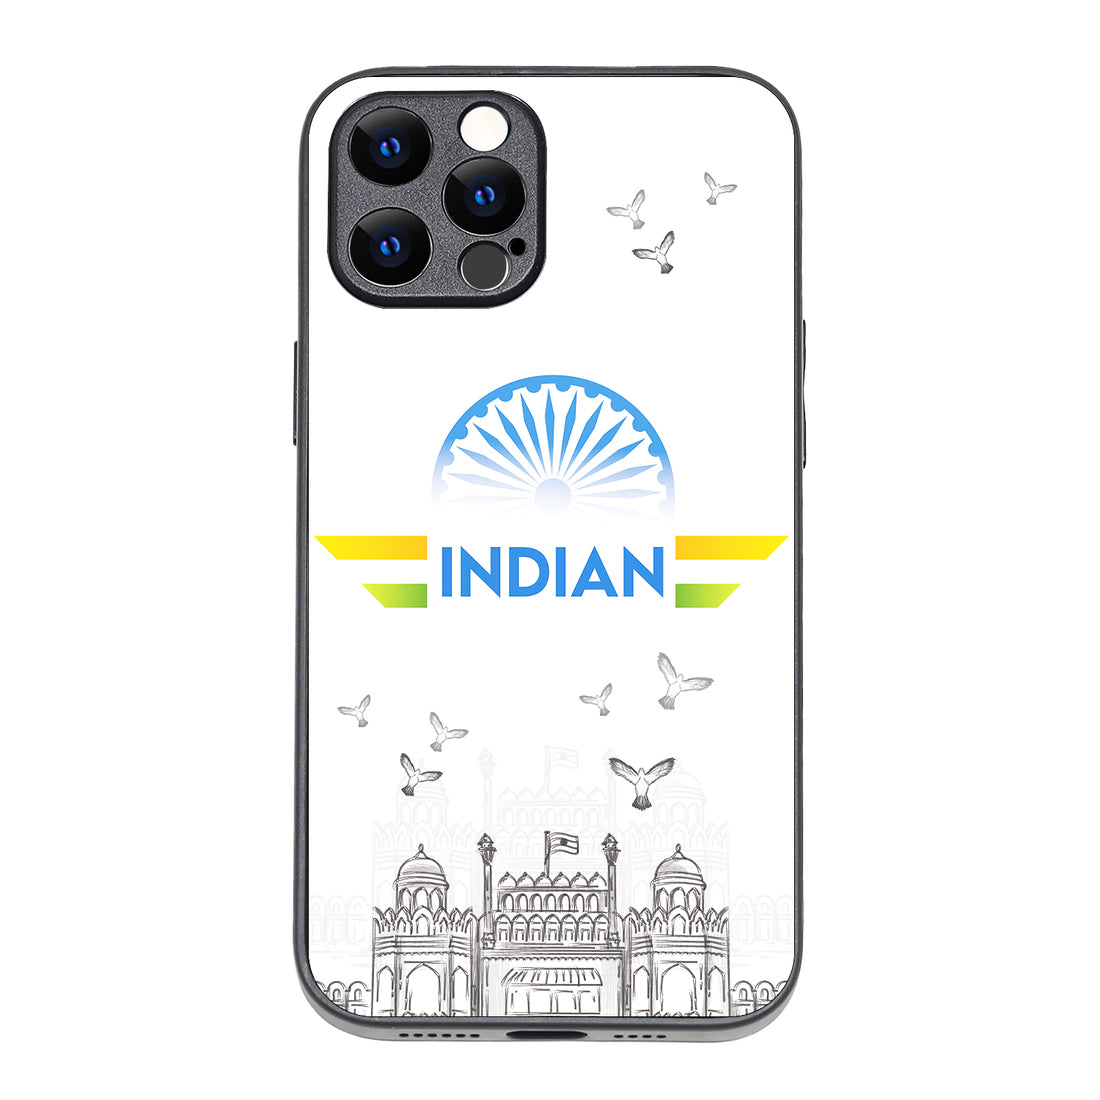 Indian iPhone 12 Pro Max Case